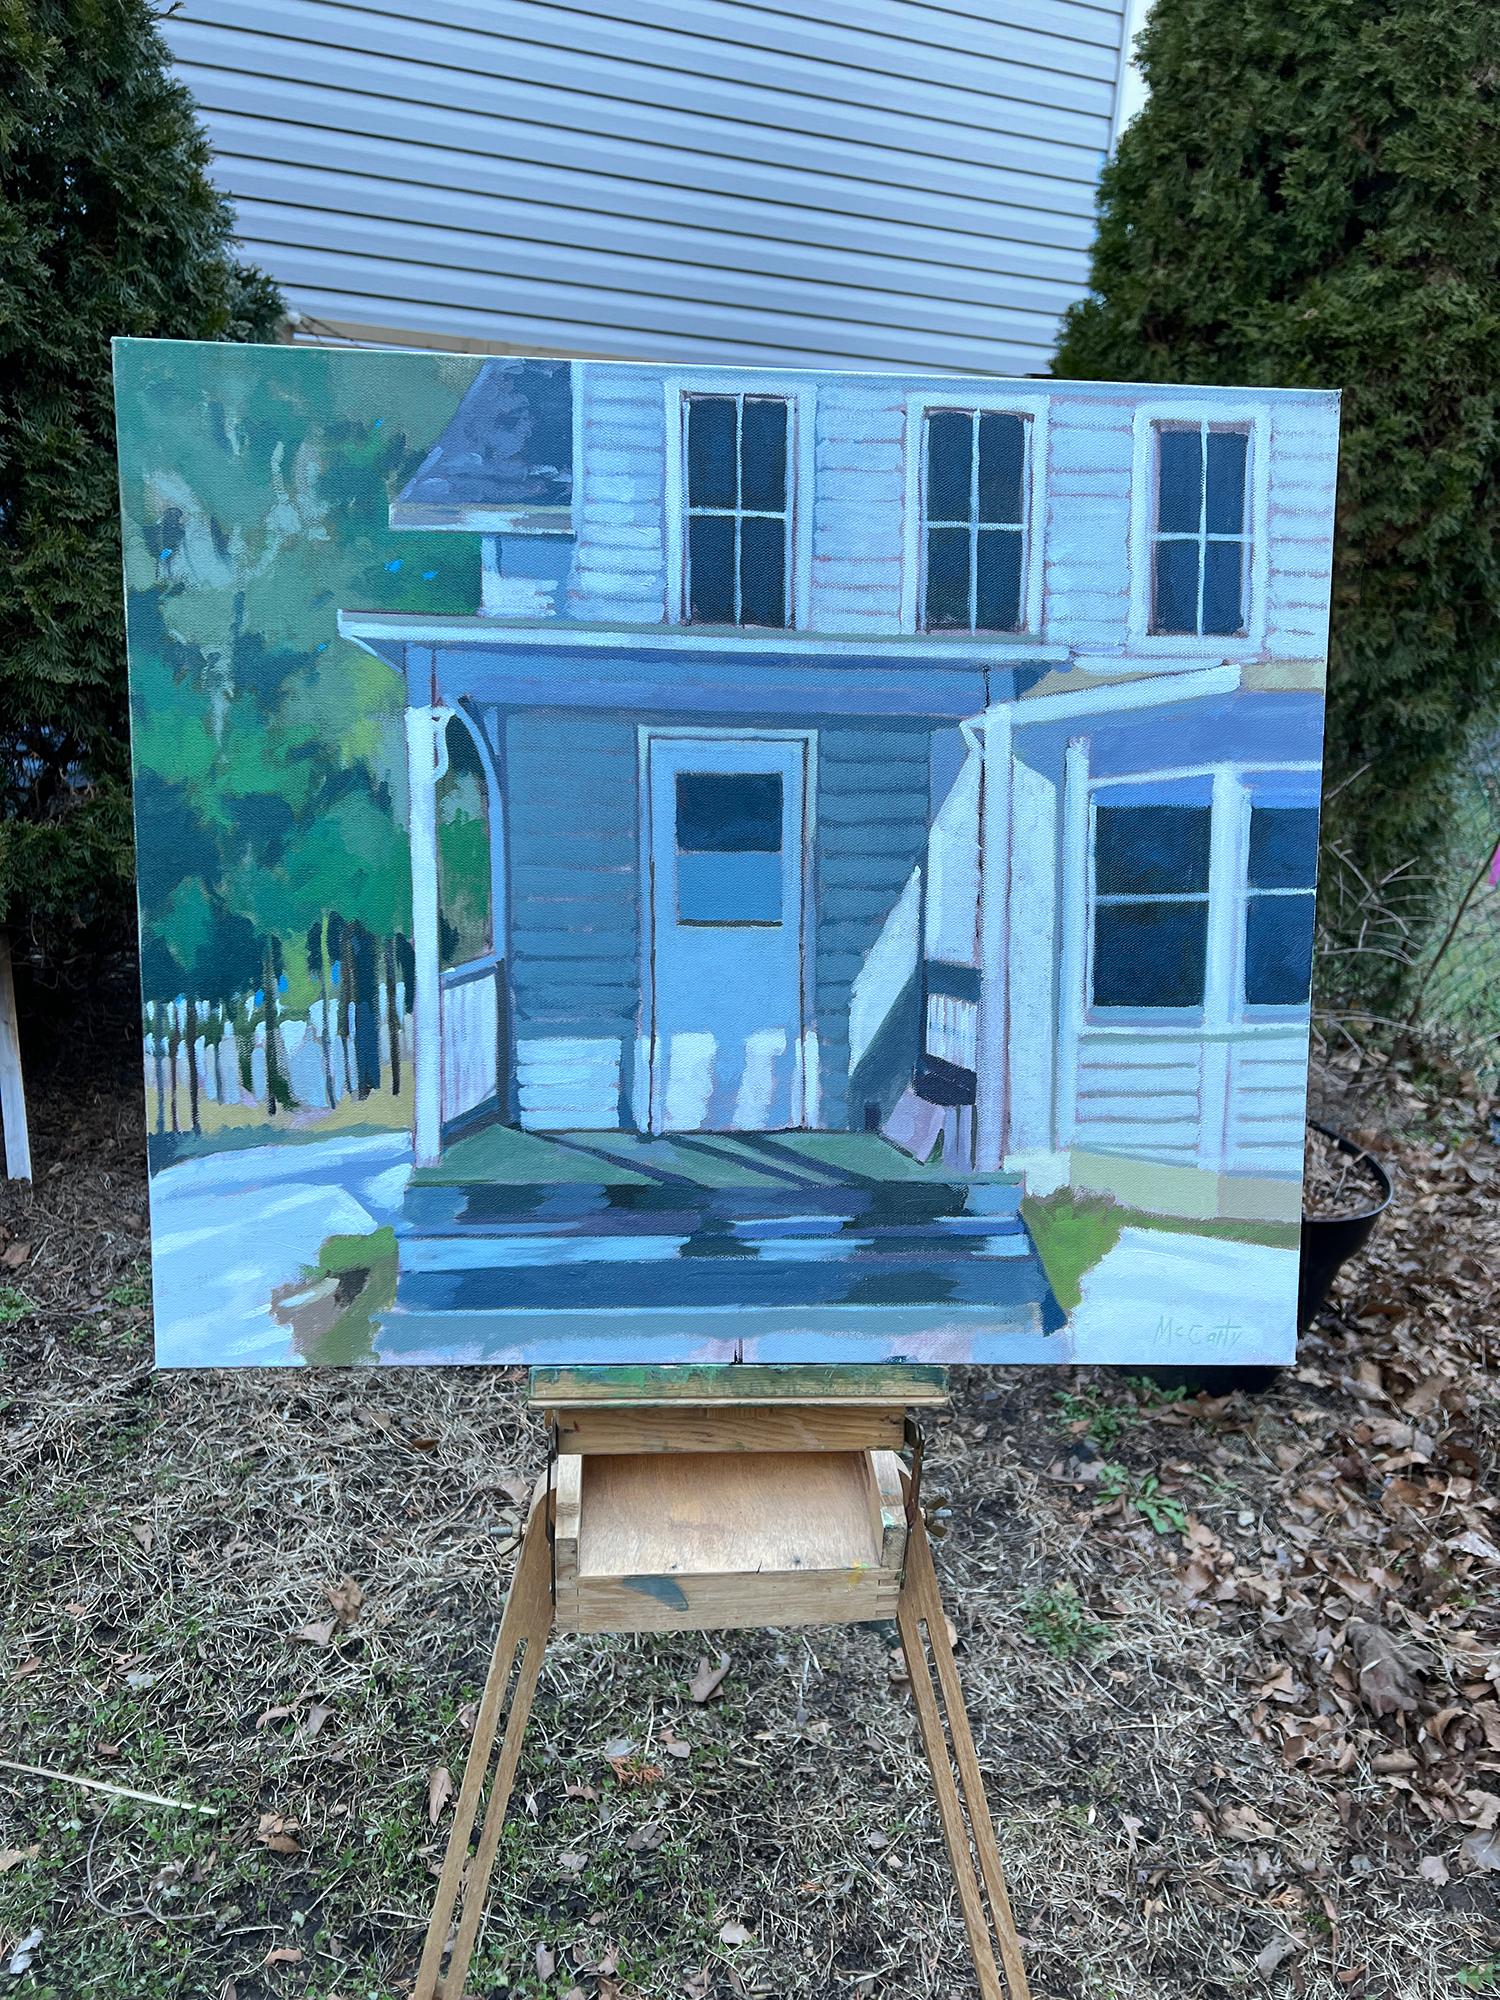 <p>Artist Comments<br>Artist Brian McCarty paints a glimpse of a house in the countryside. He paints the piece with a cool palette, matching the peaceful atmosphere of the rural setting. Winter comes and transforms the landscape and the viewer's